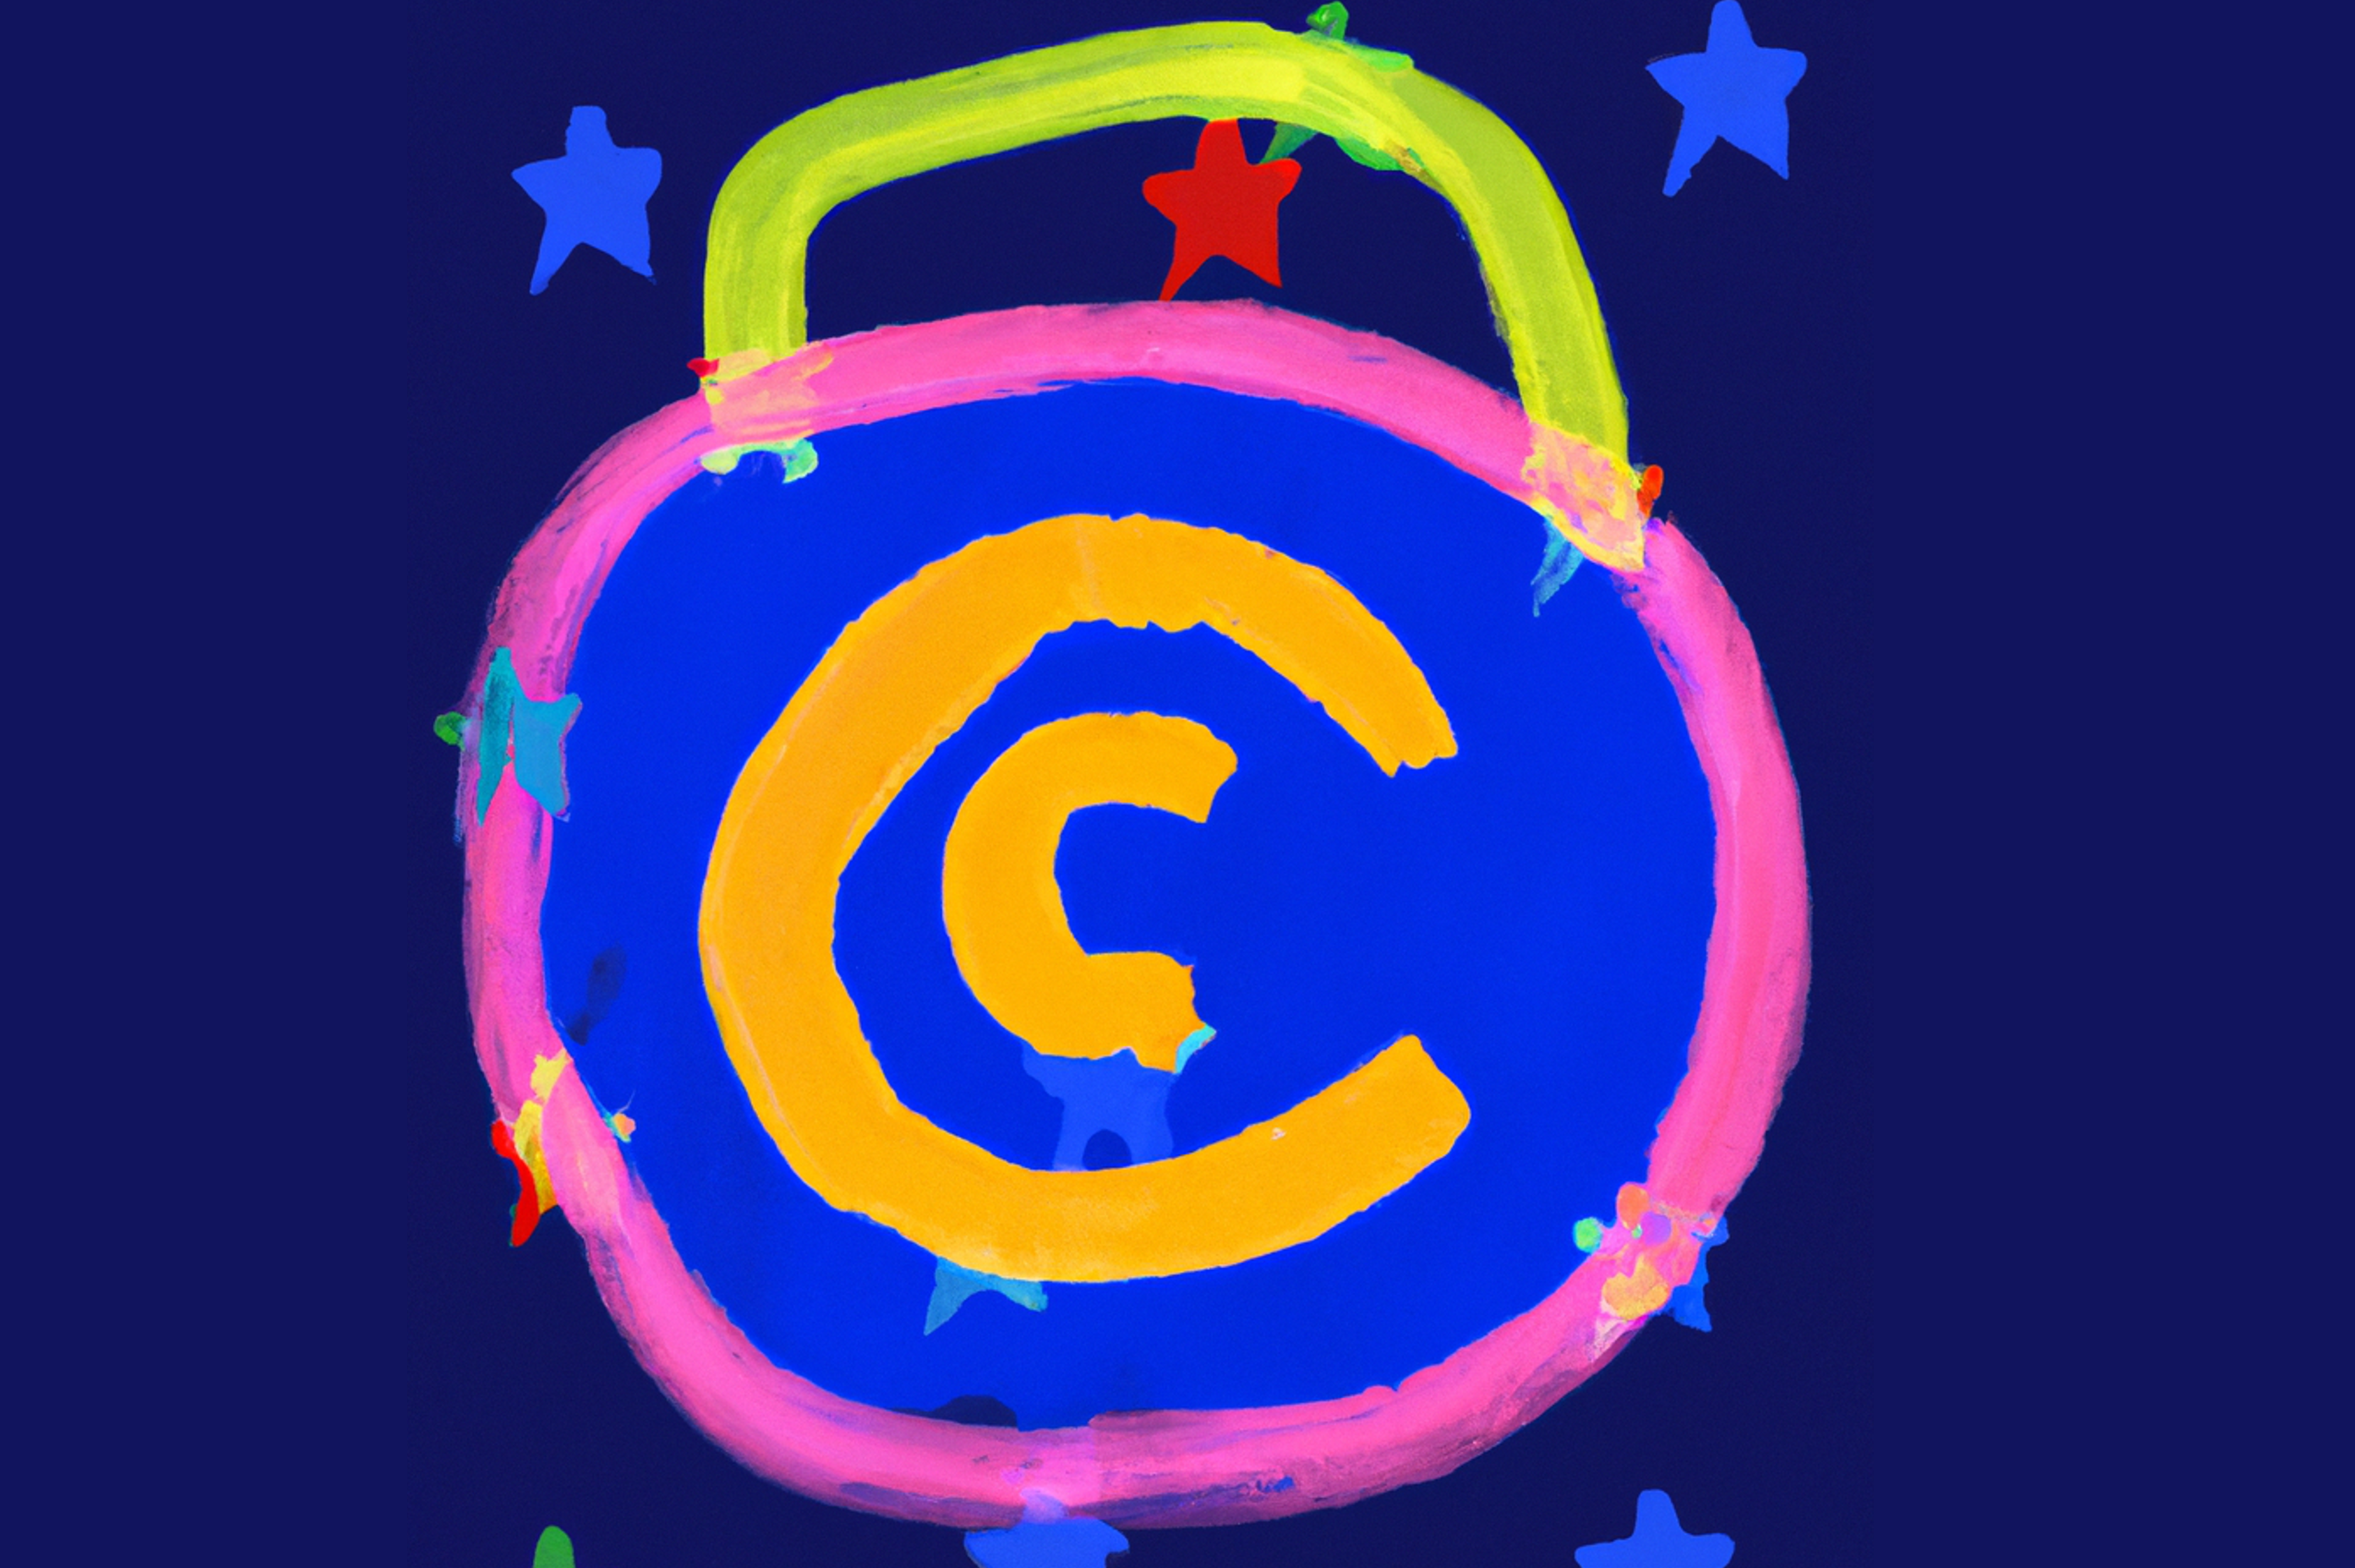 Creative commons logo in a padlock - abstract art